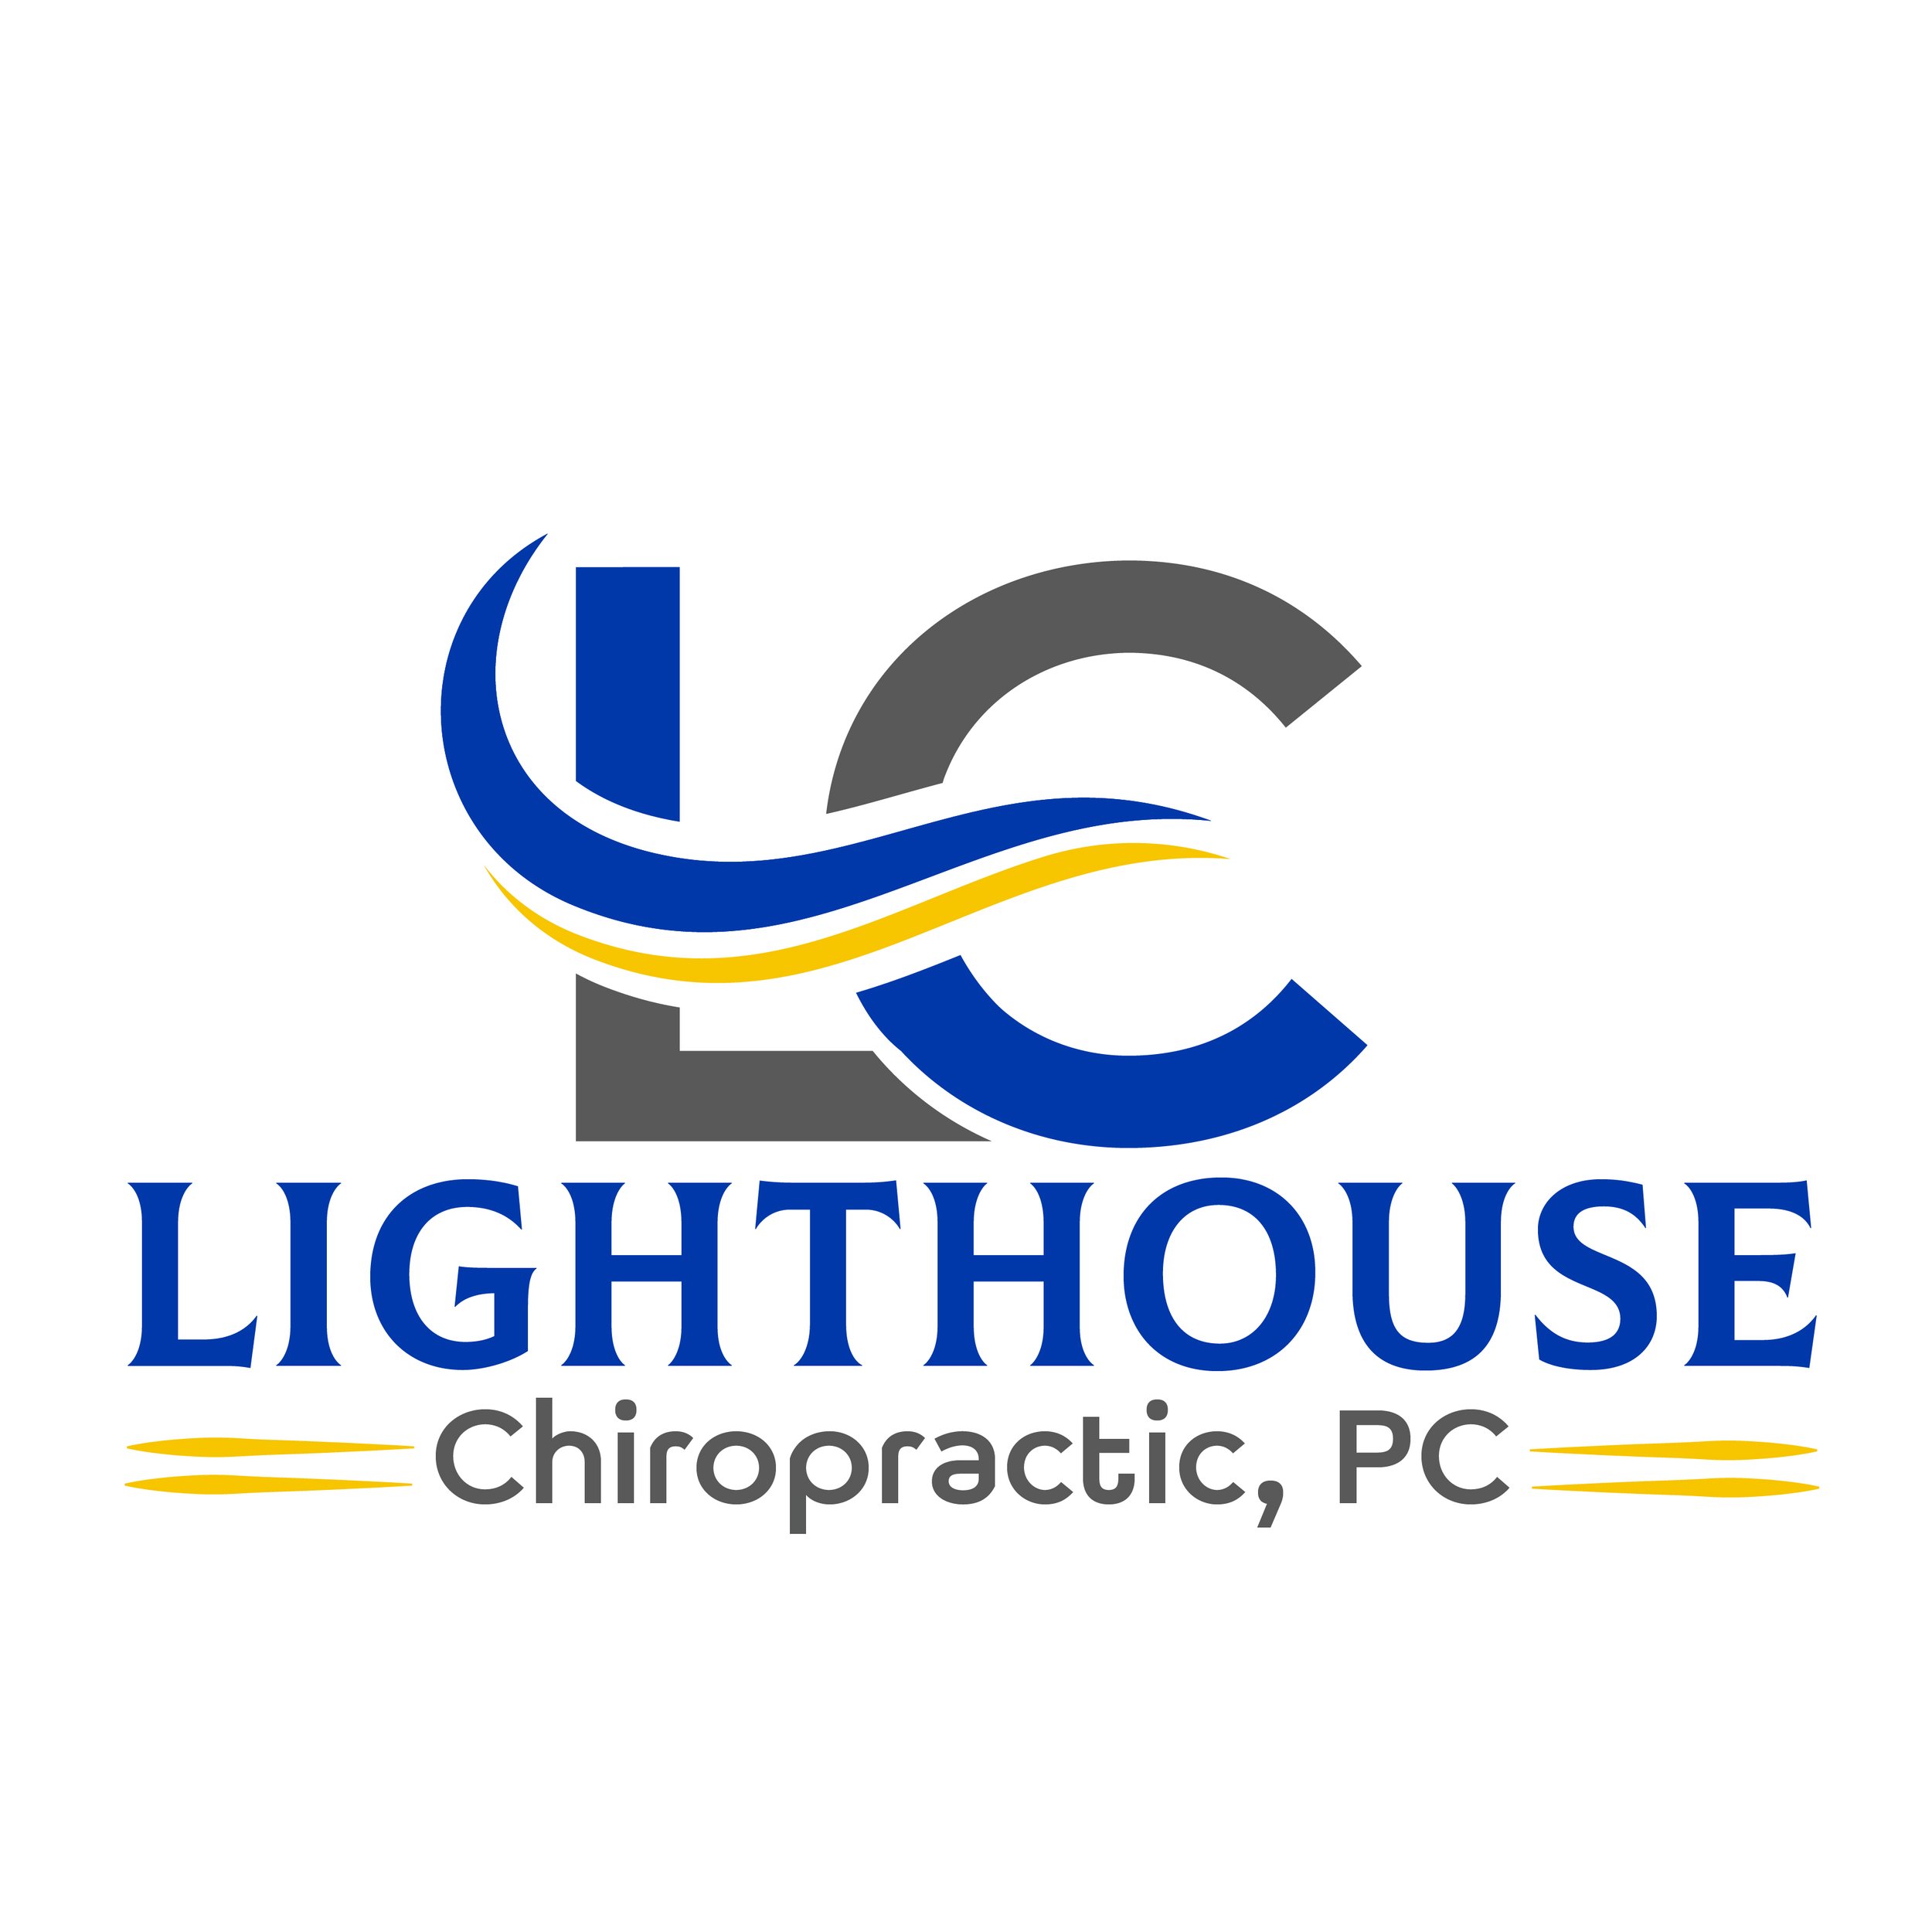 Lighthouse Chiropractic, PC